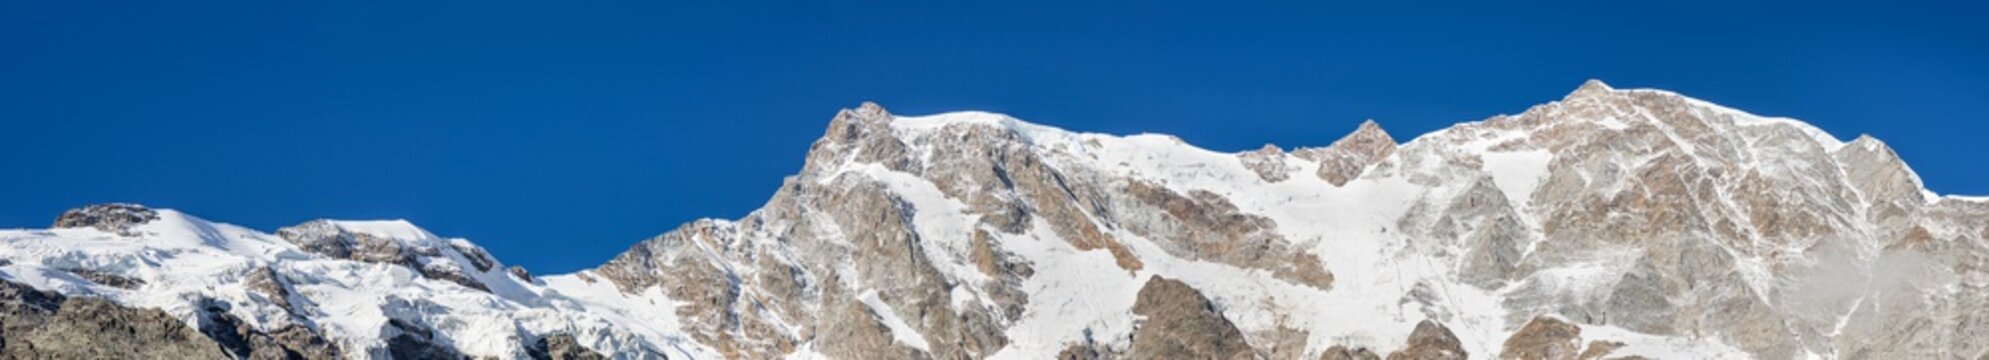 East wall of Monte Rosa with the highest peaks, Macugnaga, Italy. Are visible the Tre Amici tip, Gnifetti tip, Zumstein, the Dufour tip, the Nordend, the Jagerhorn